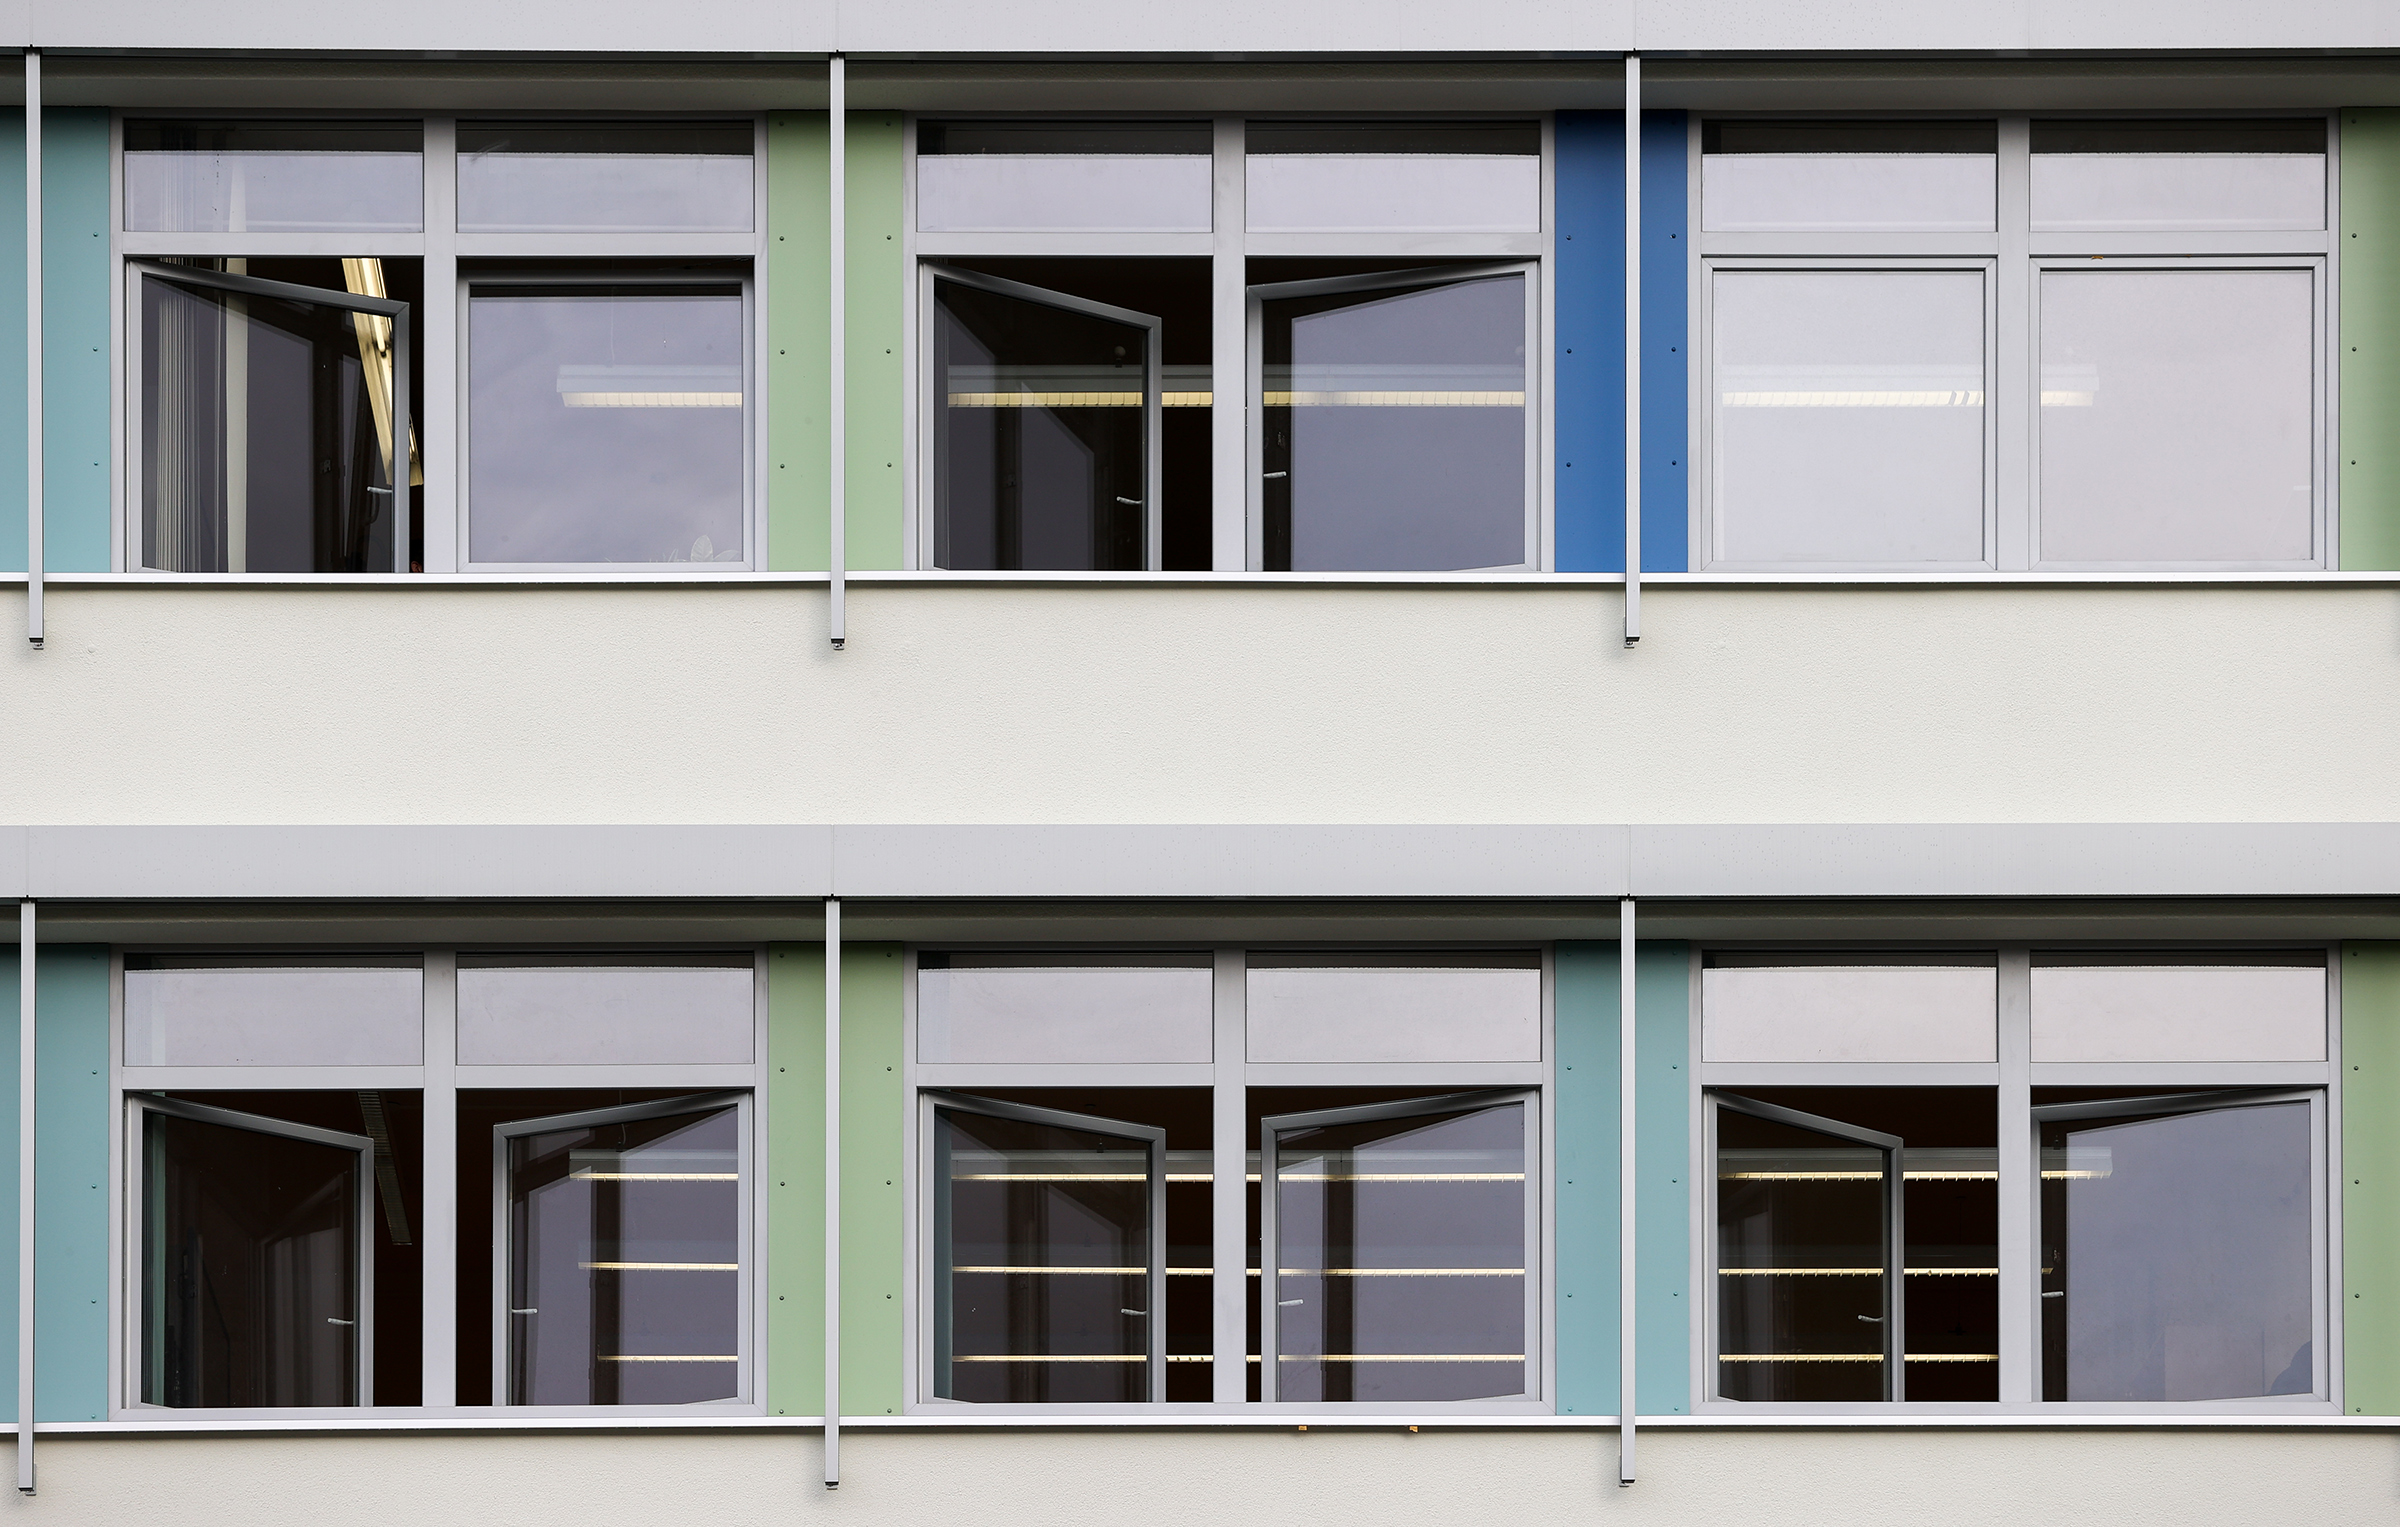 Several windows of a school are open for ventilation on Monday morning in Leipzig, November 2020. (Jan Woitas—dpa-Zentralbild/picture alliance/Getty Images)